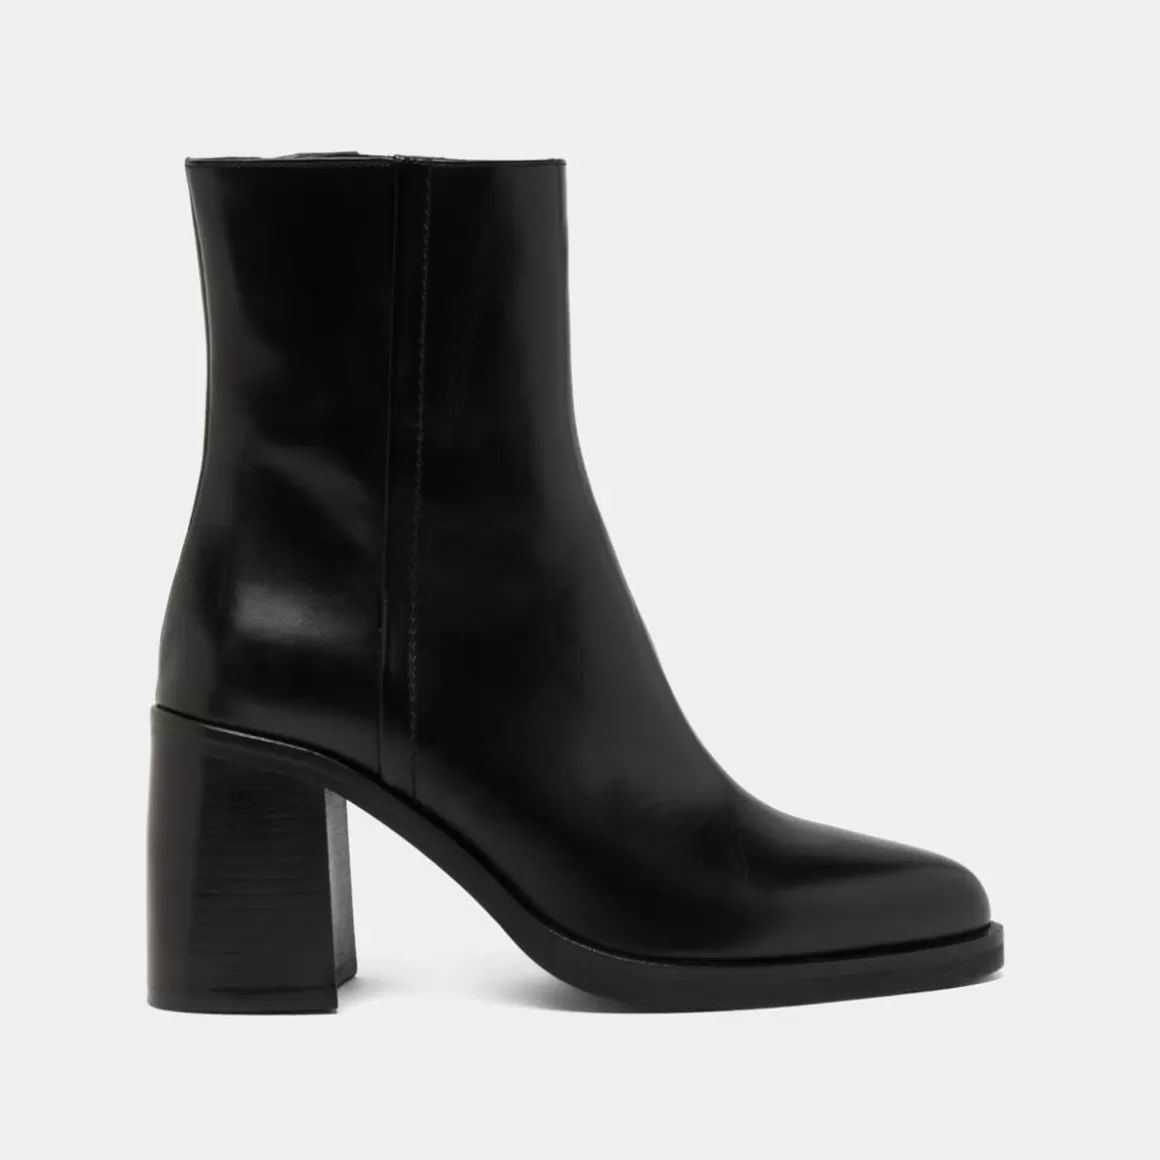 Ankle boots with heels<Jonak New